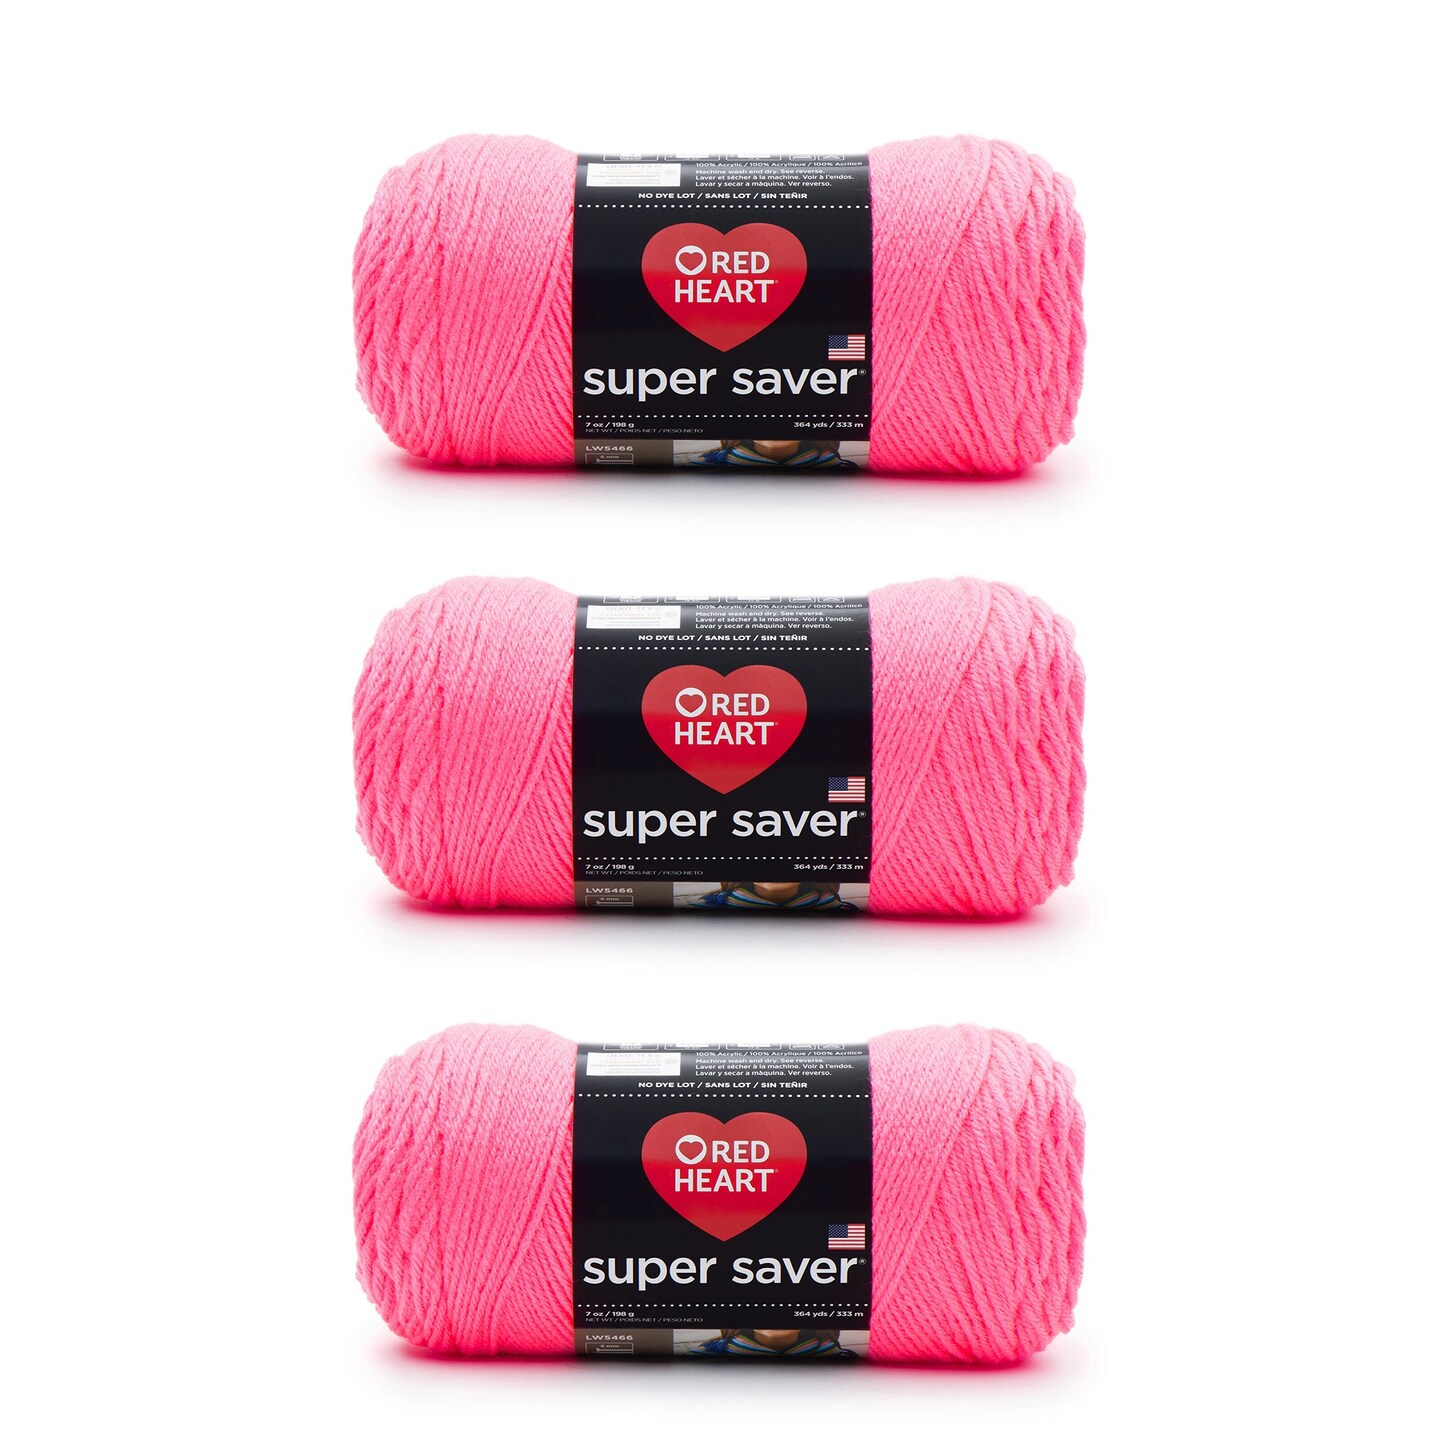 Red Heart Super Saver White Yarn Medium worsted weight 4-ply